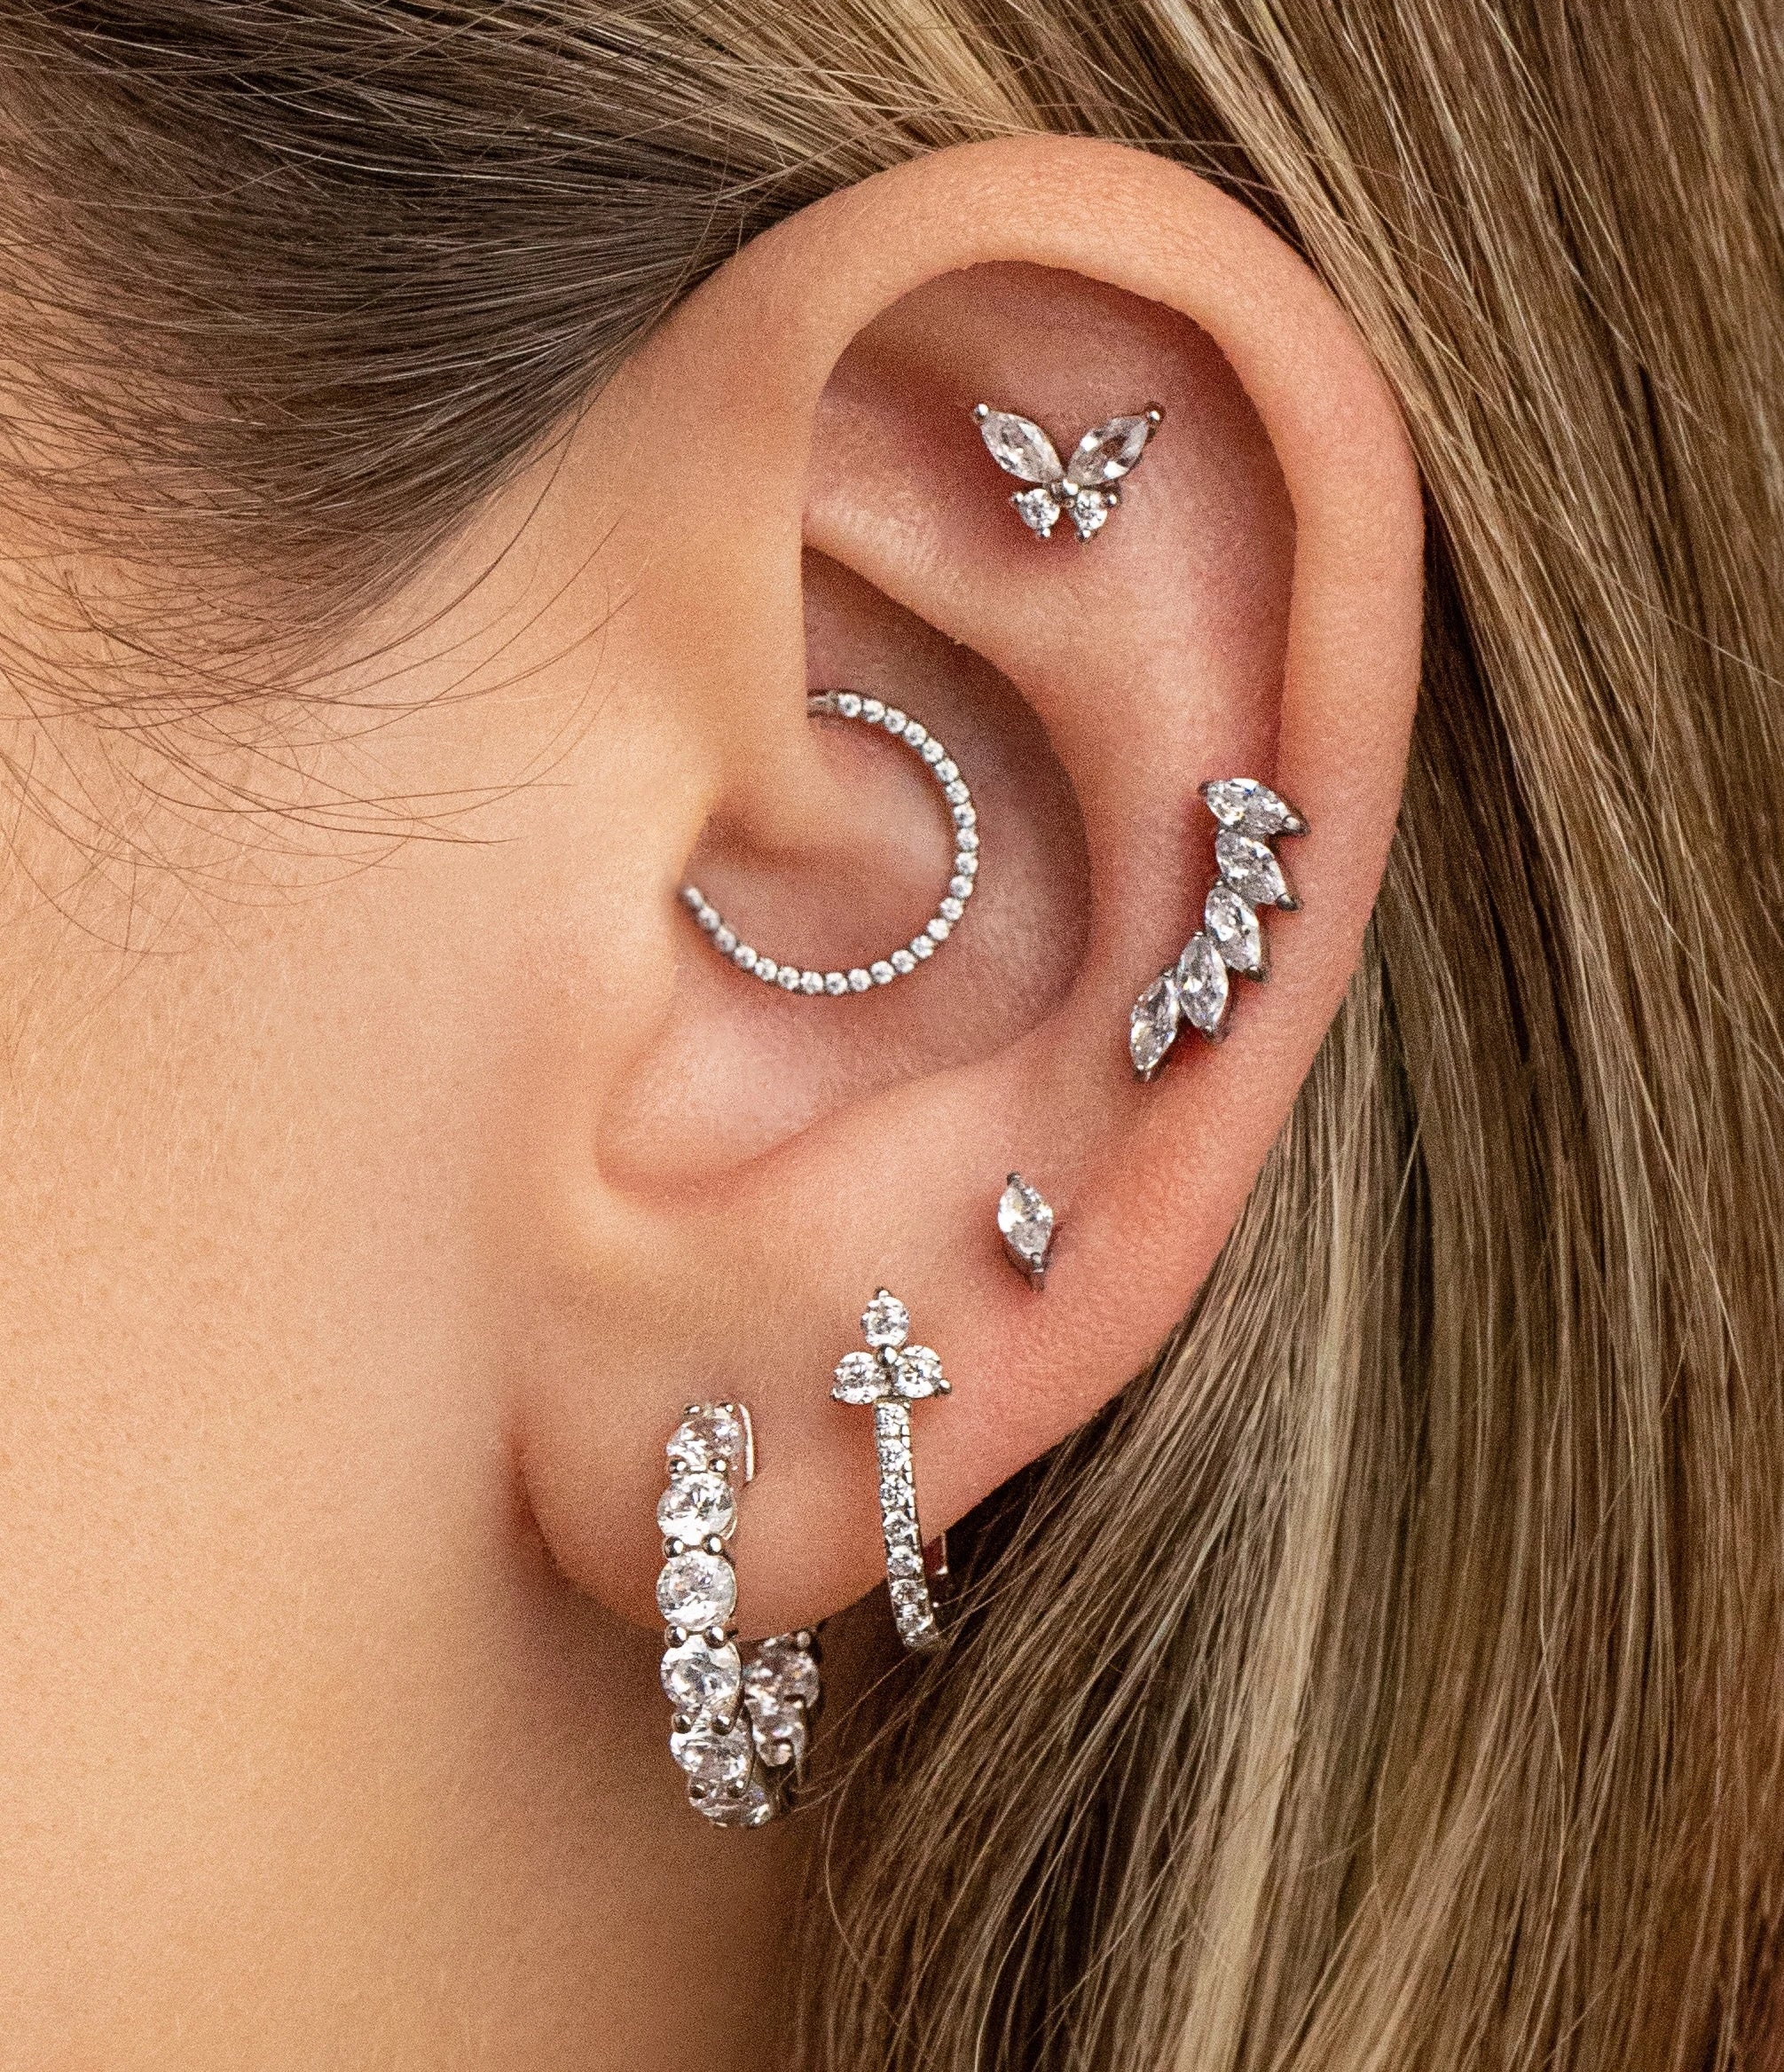 Online Piercing Services: Professional online piercing services - Lulu Ave Body Jewelery